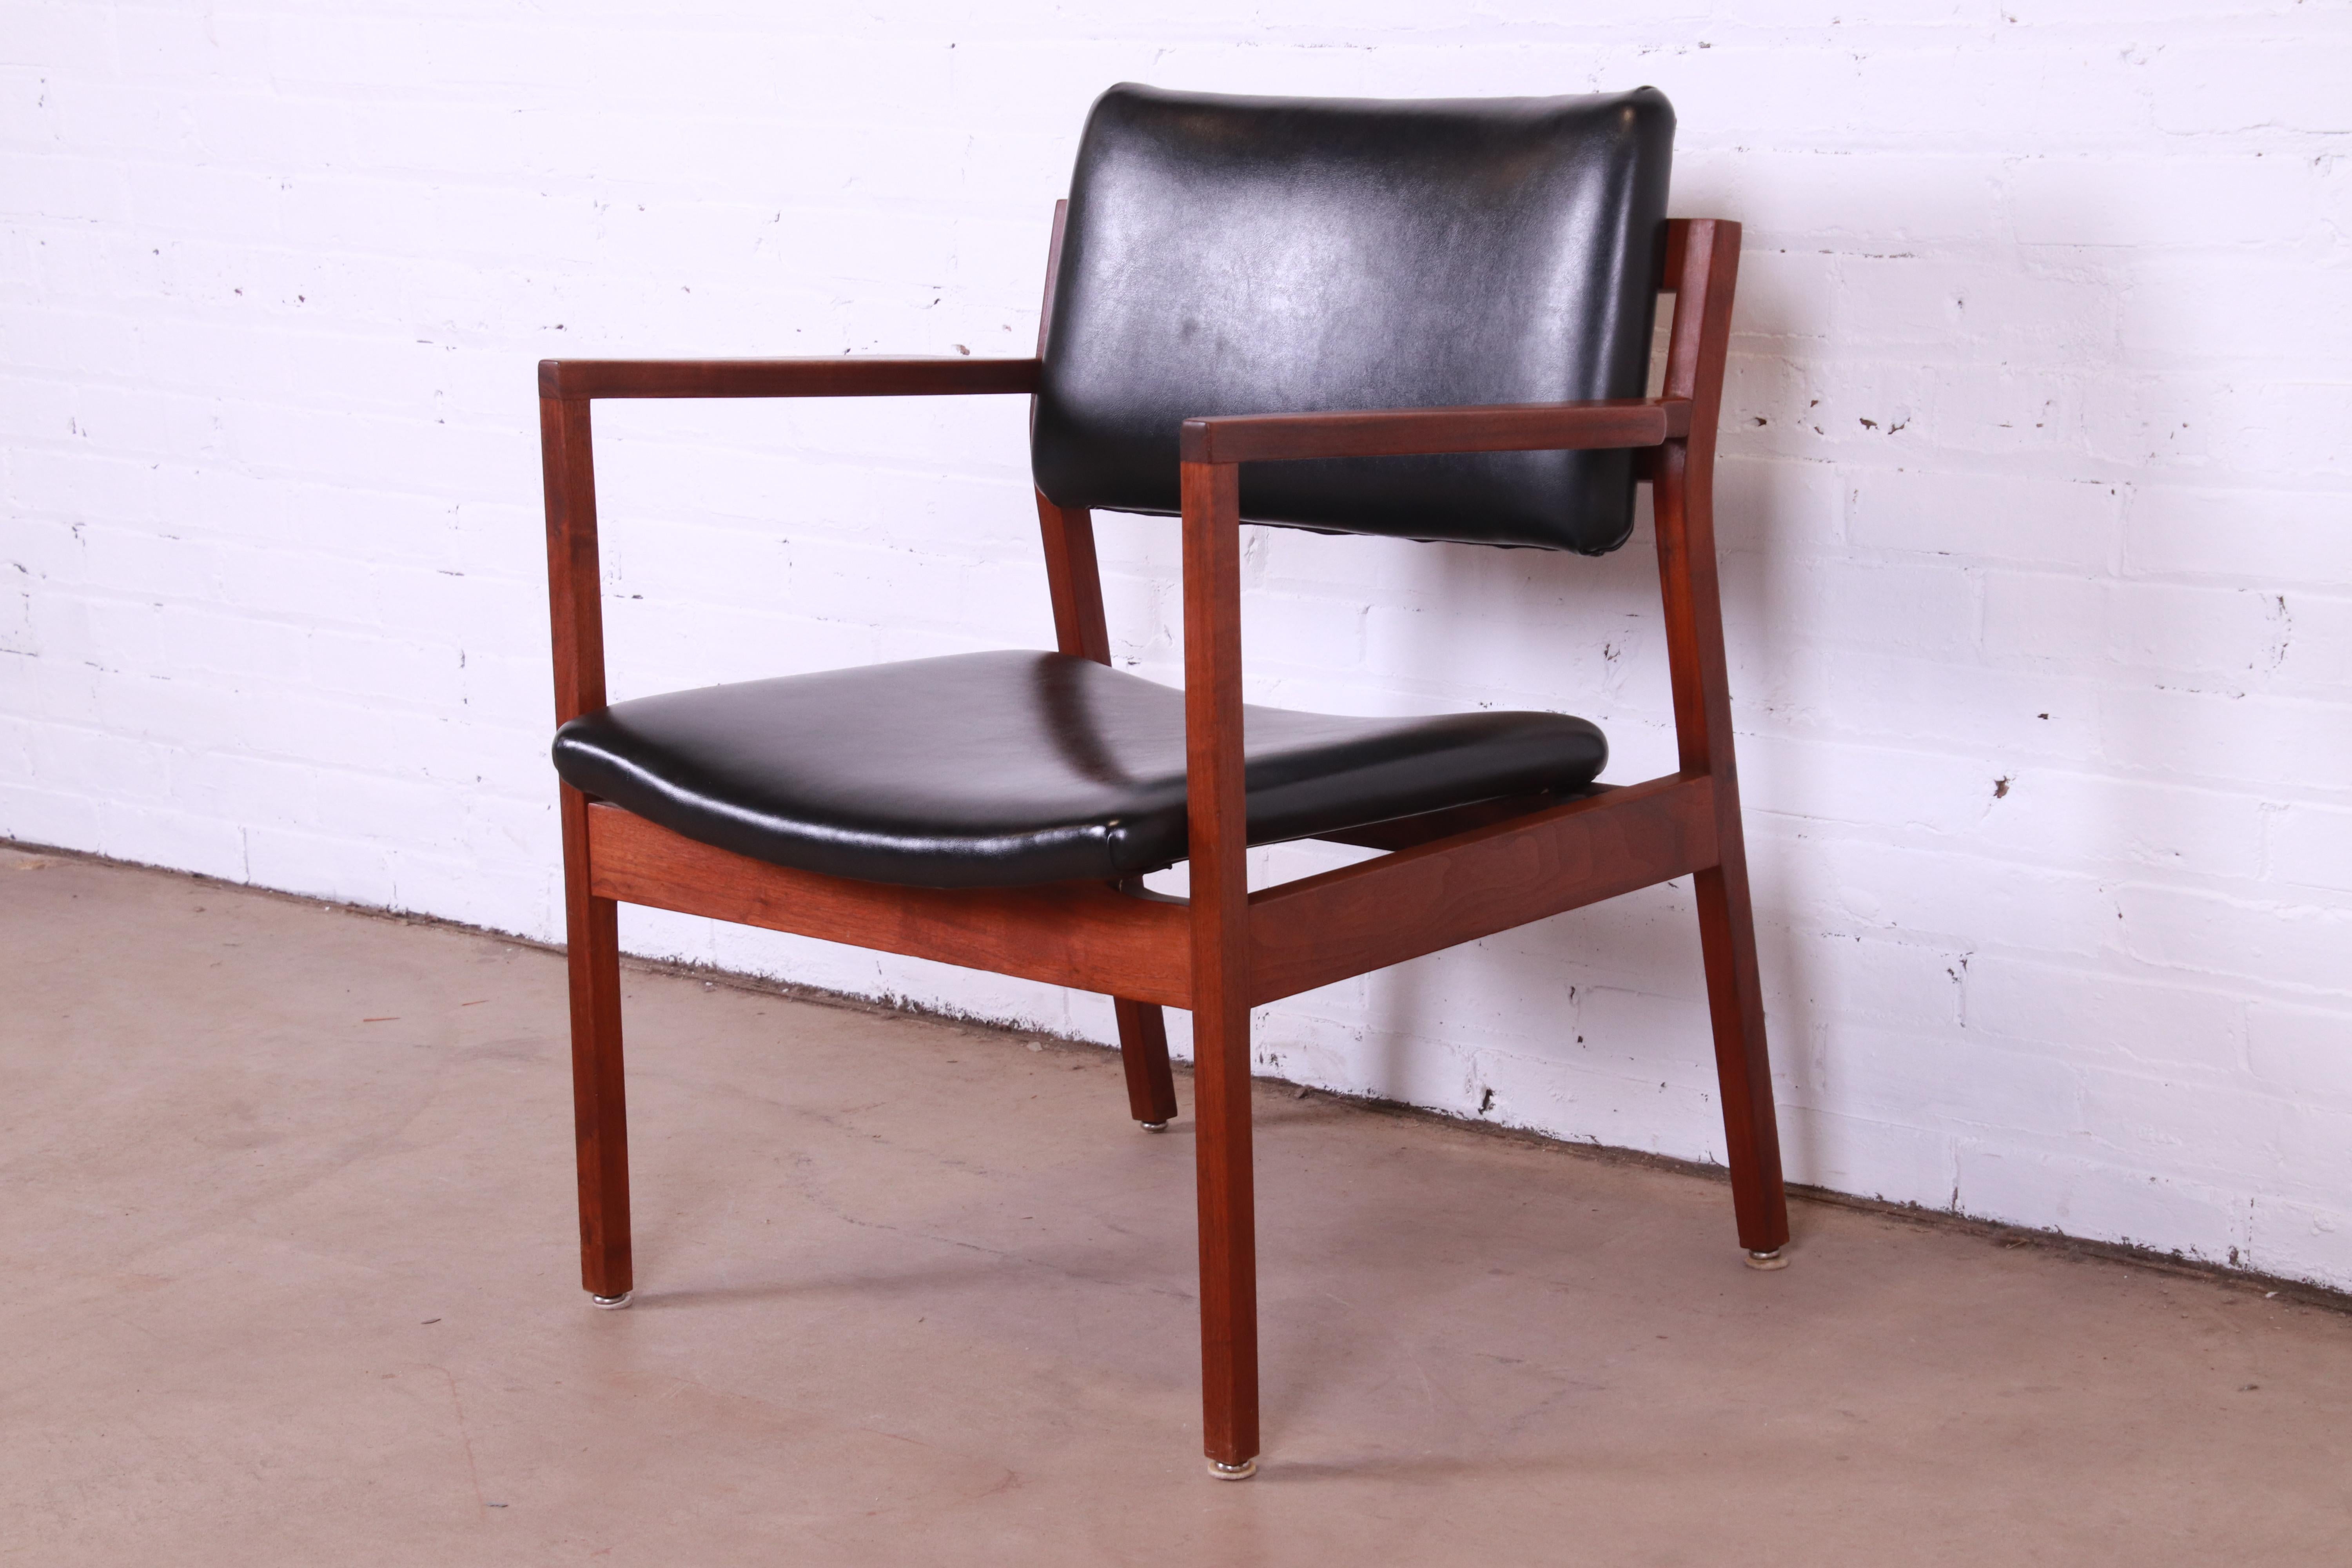 Mid-20th Century Jens Risom Style Mid-Century Modern Sculpted Walnut Lounge Chair, 1960s